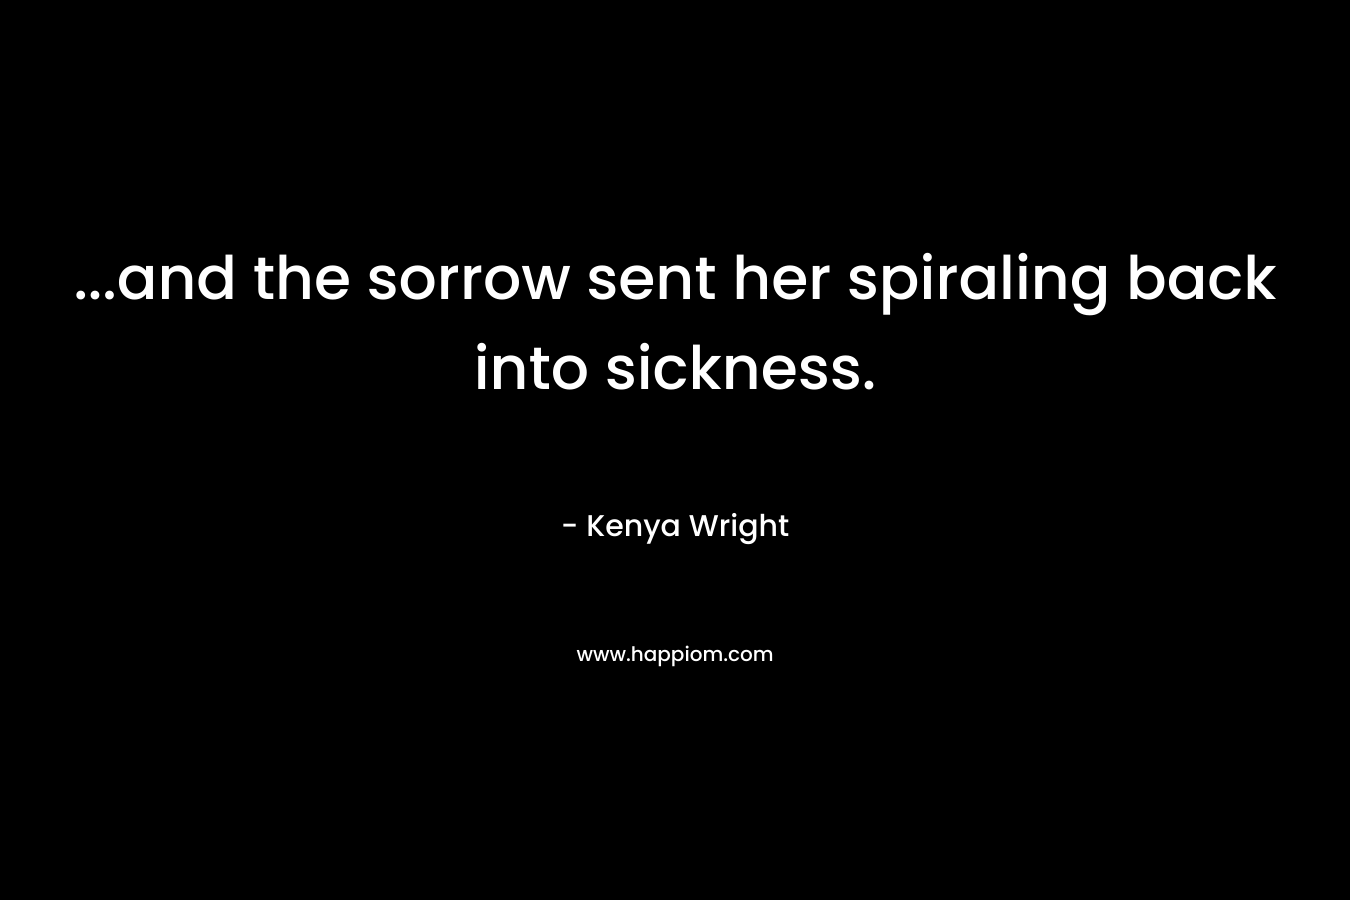 …and the sorrow sent her spiraling back into sickness. – Kenya Wright